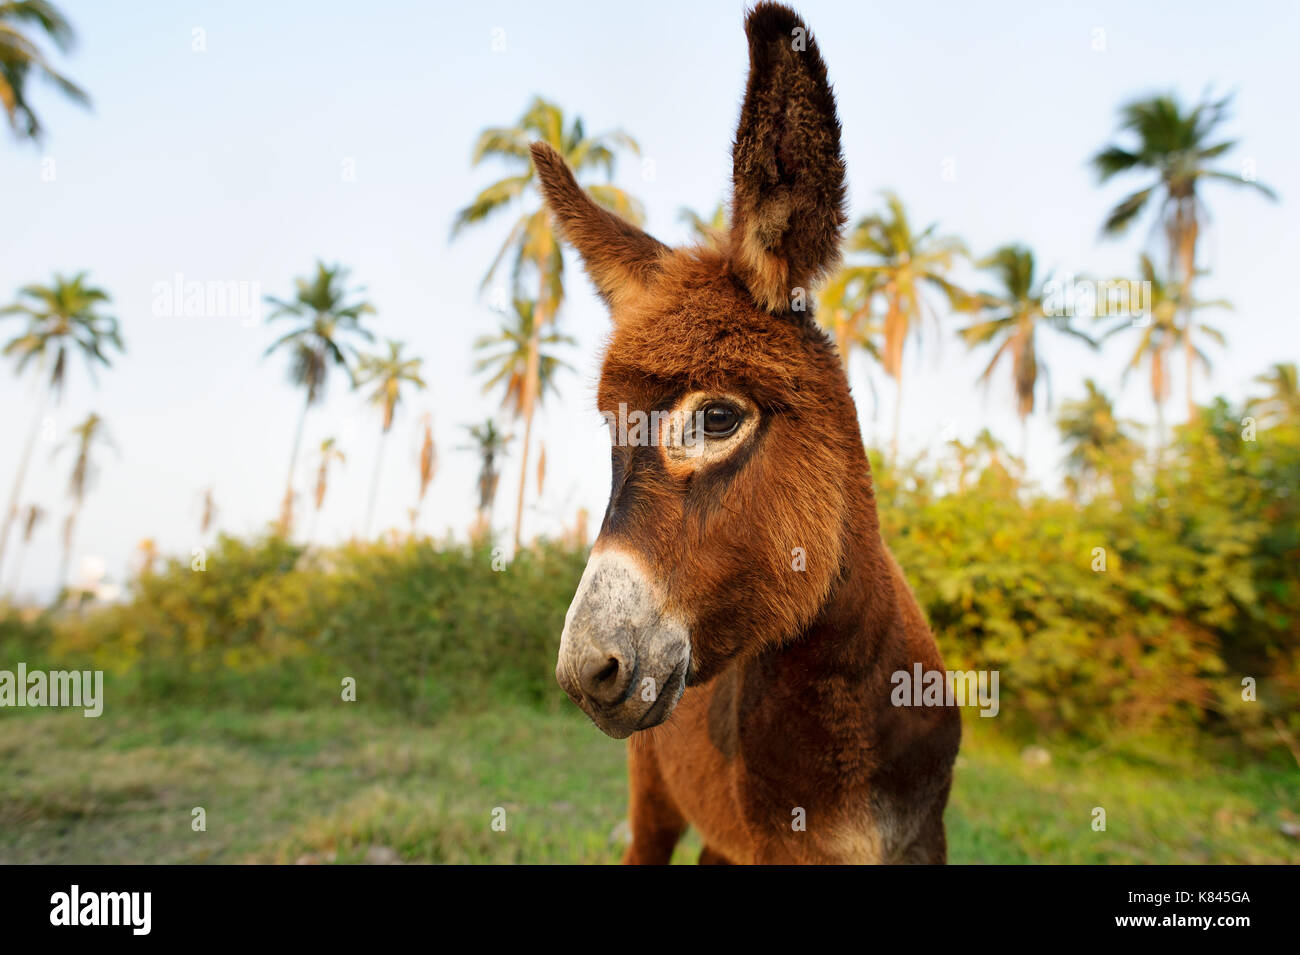 Donkey baby is a cute curious shy baby donkey with great big adorable floppy ears looking right at you. Stock Photo